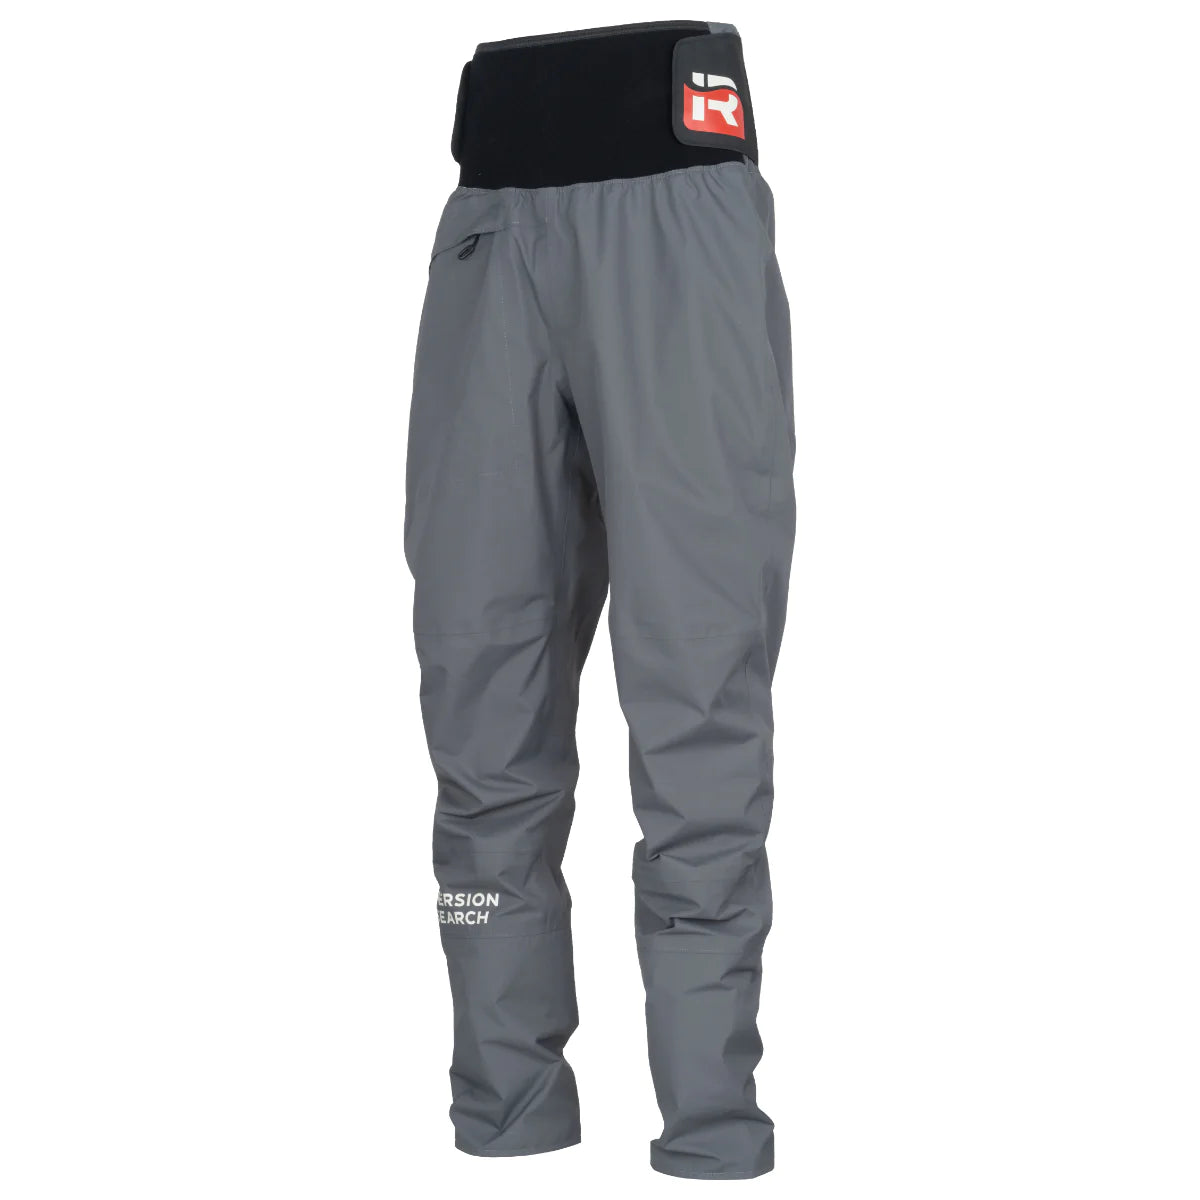 A pair of comfortable and durable Immersion Research Rival Paddling Pant with a logo on the side.